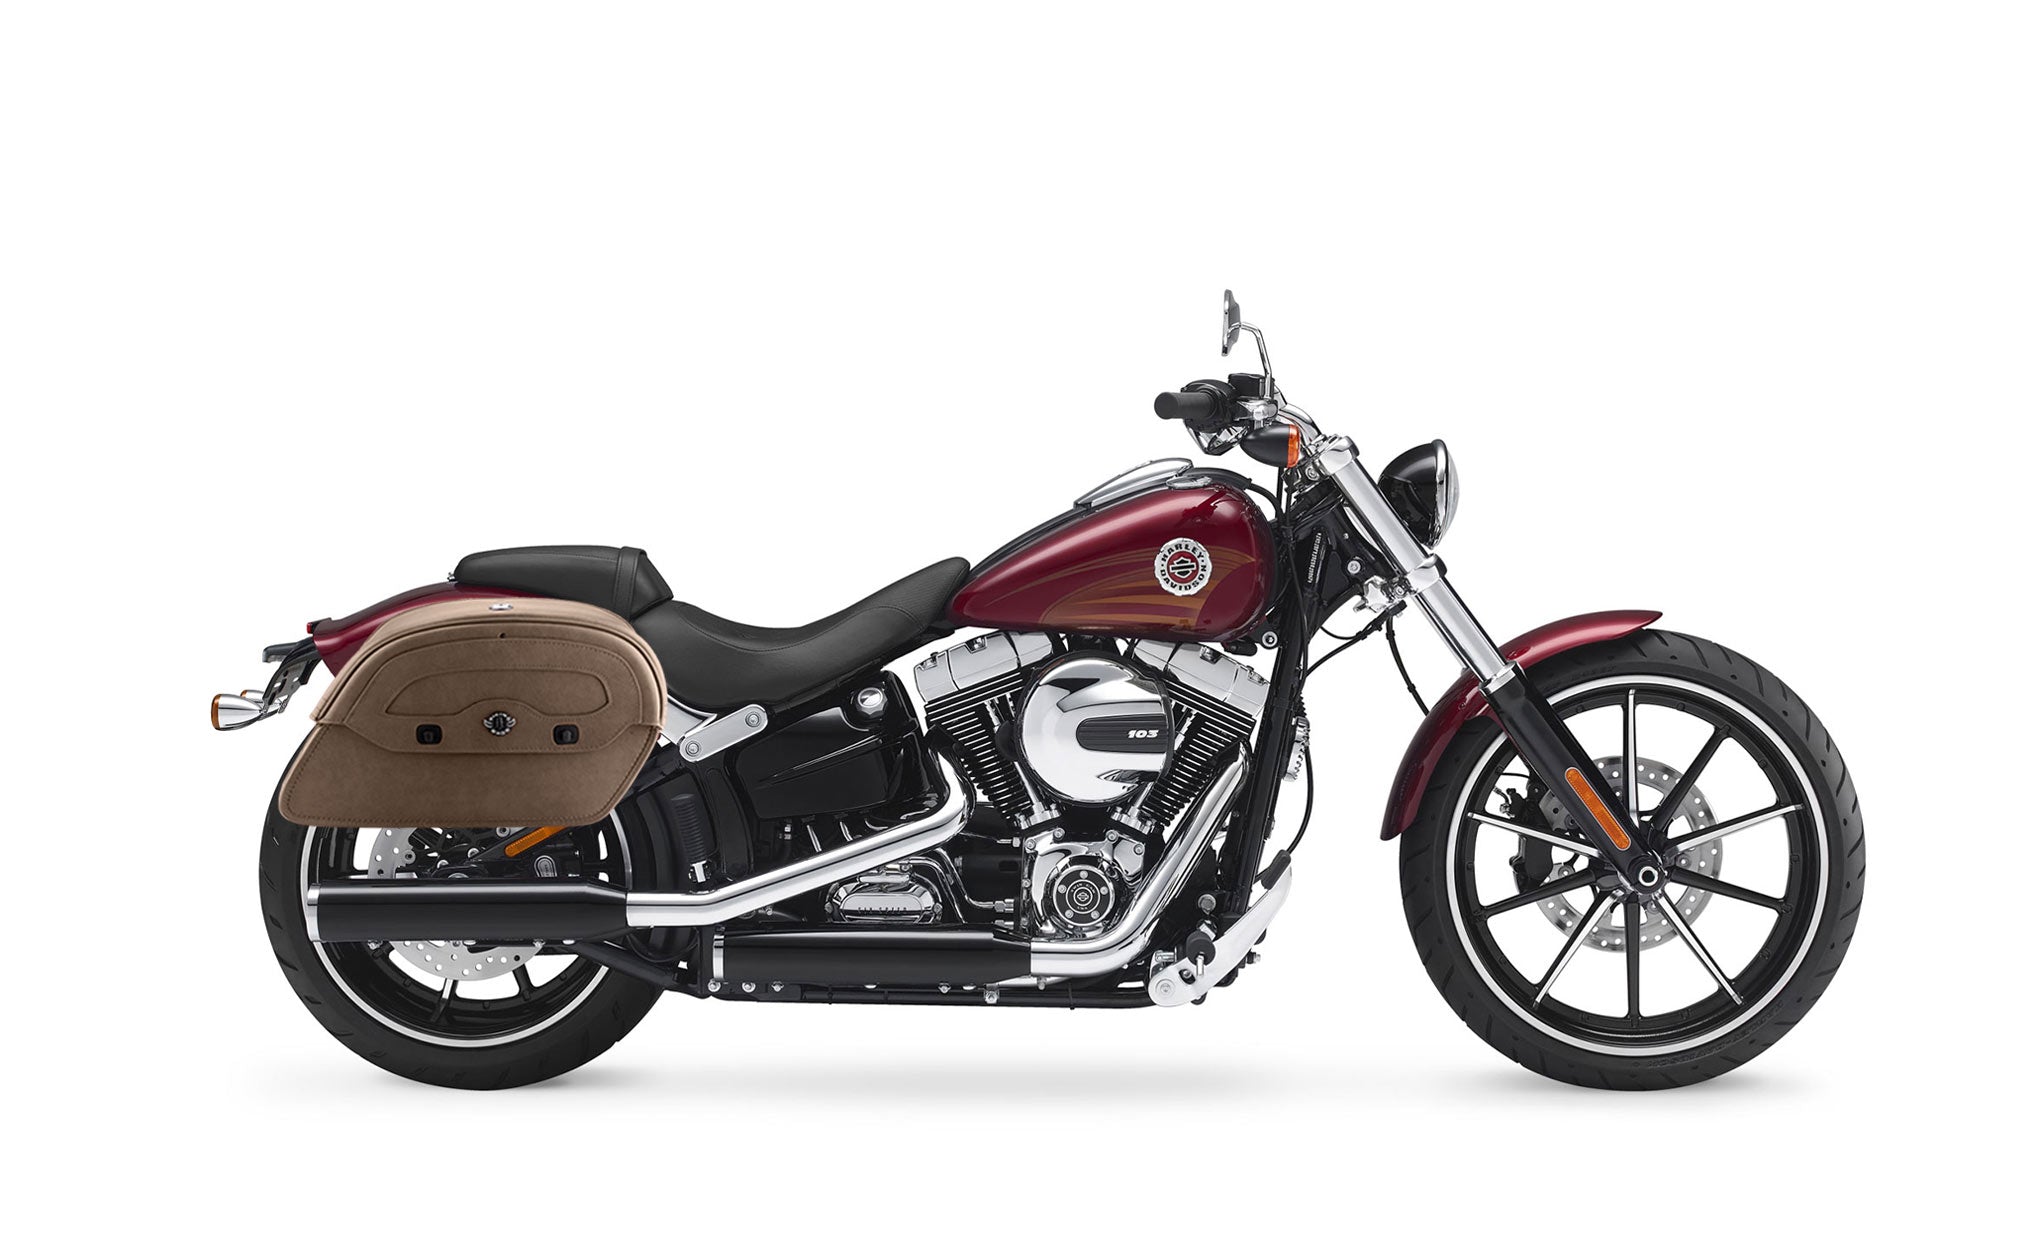 Viking Warrior Brown Large Leather Motorcycle Saddlebags for Harley Softail Breakout FXSB Bag on Bike View @expand